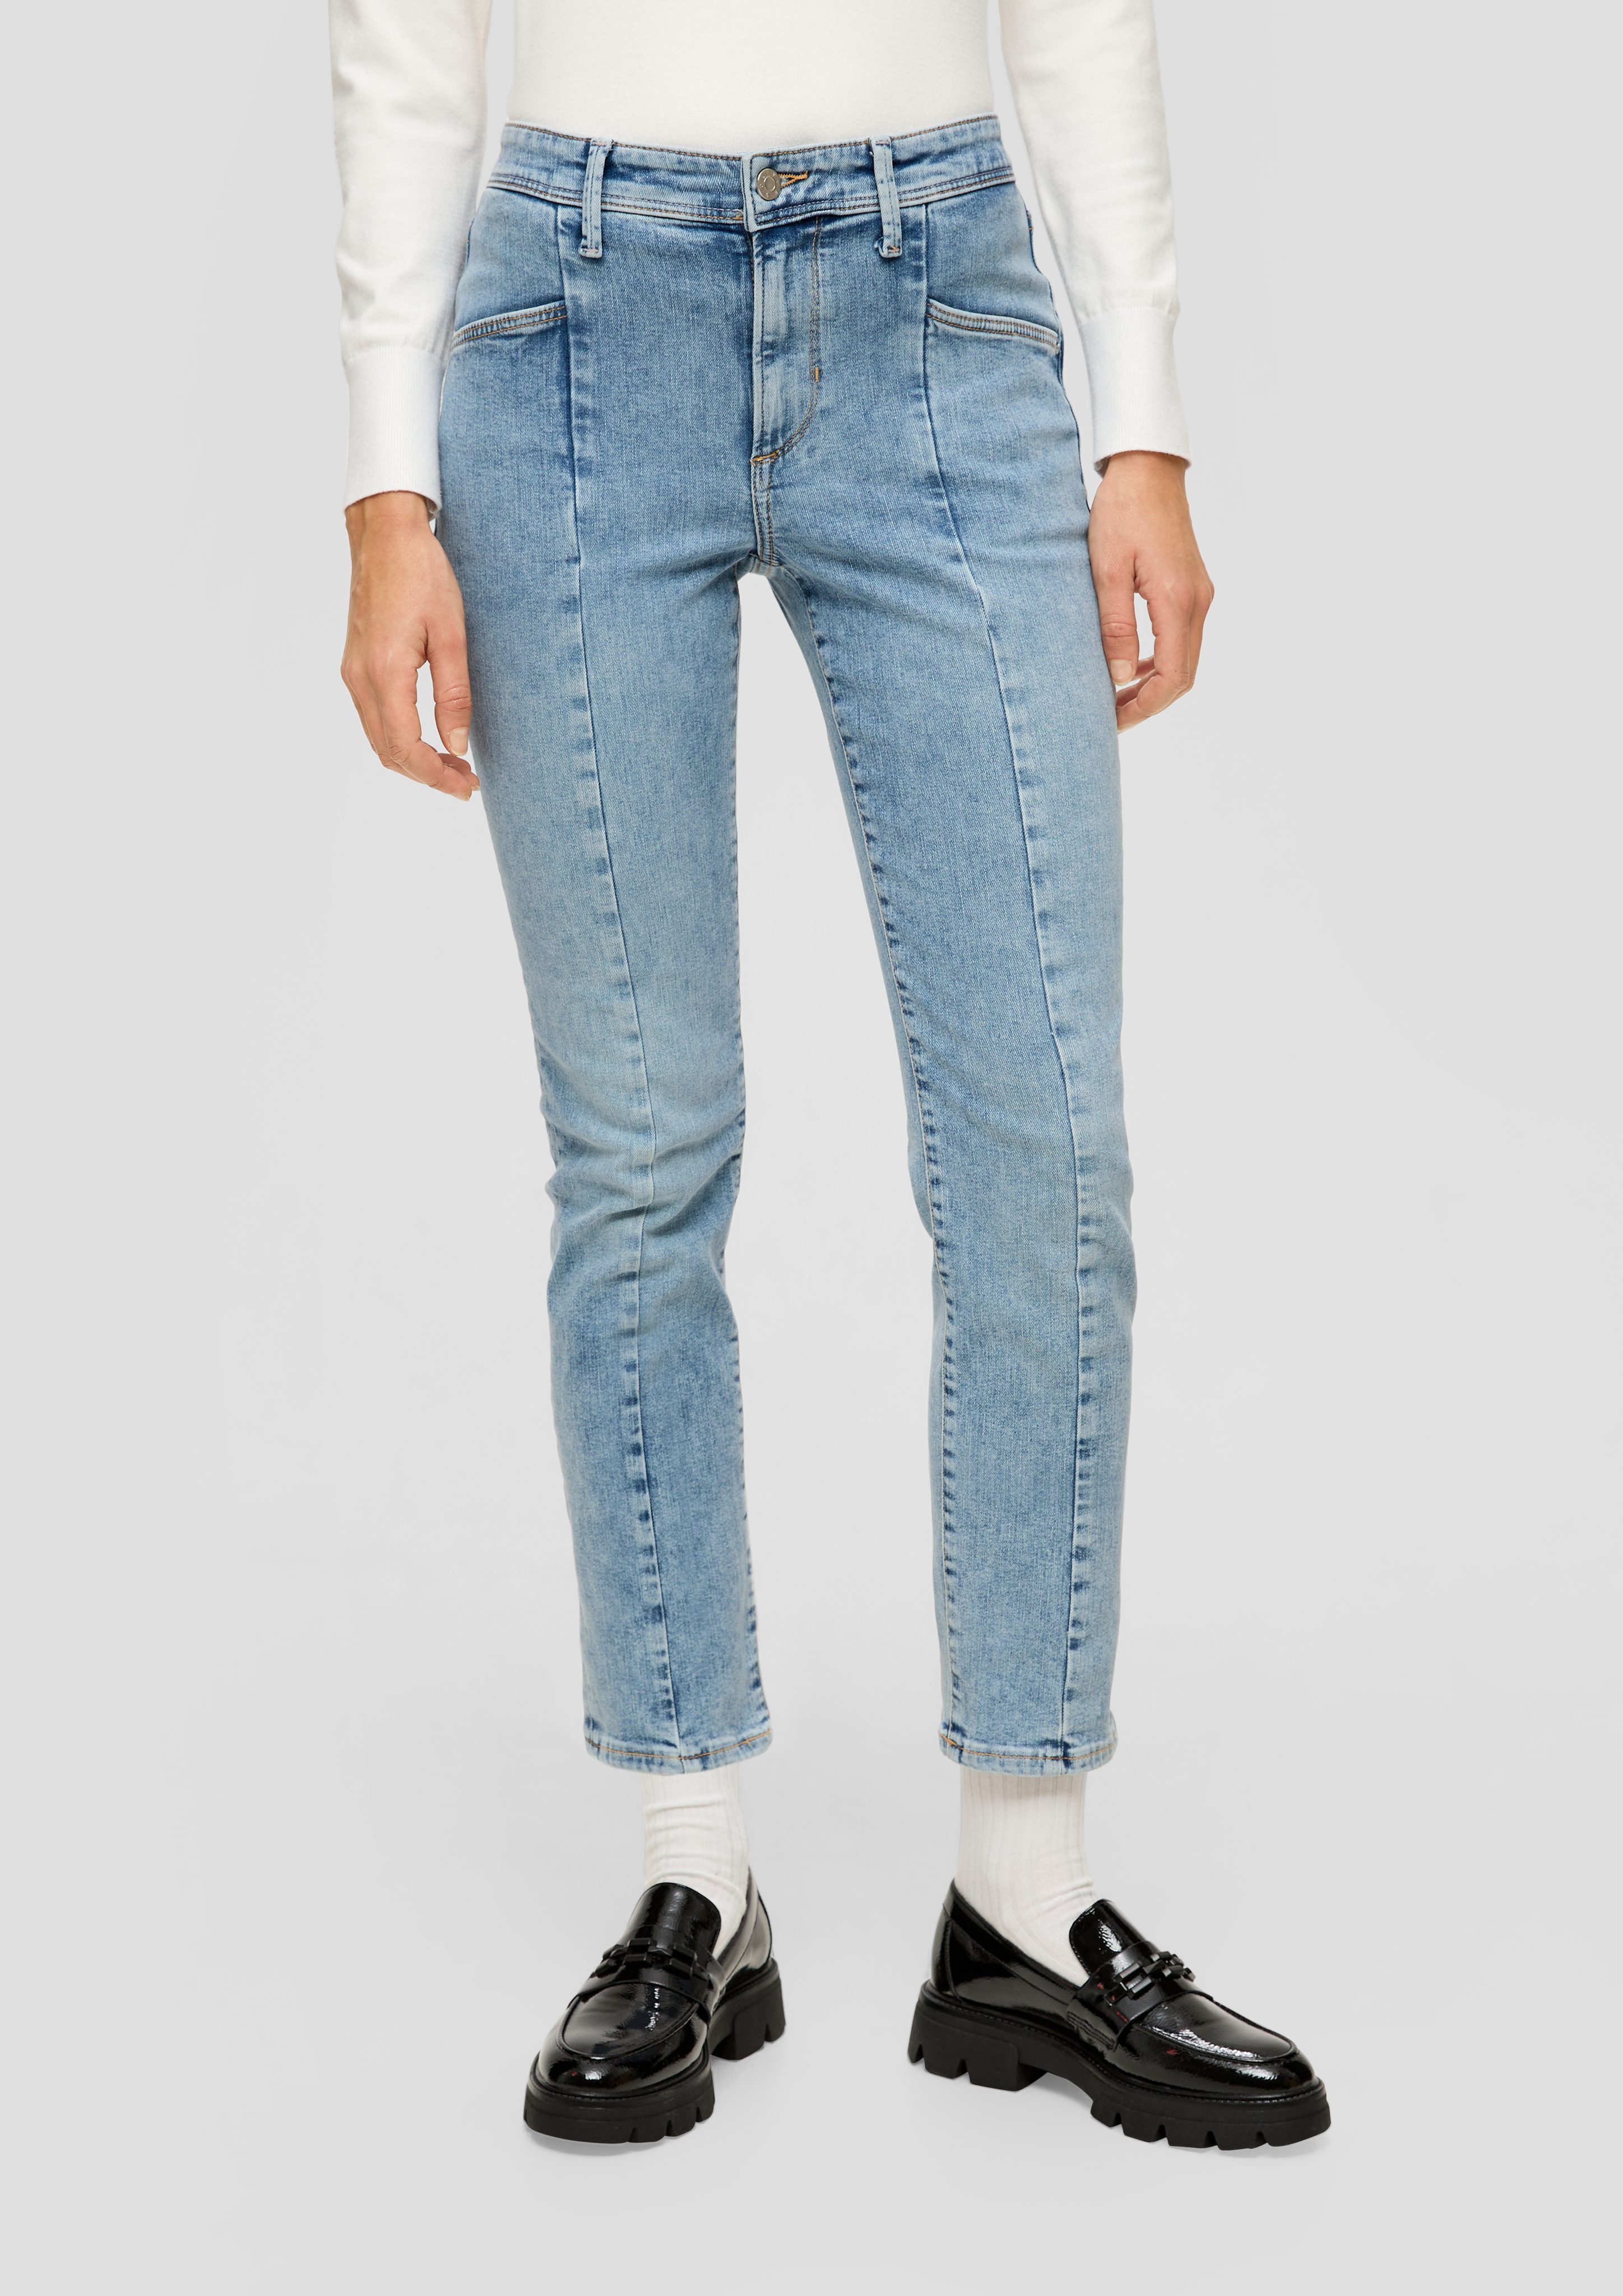 s.Oliver 7/8-Jeans Ankle Jeans / Teilungsnähte Fit Waschung, Slim Mid / Rise Slim Leg / Label-Patch